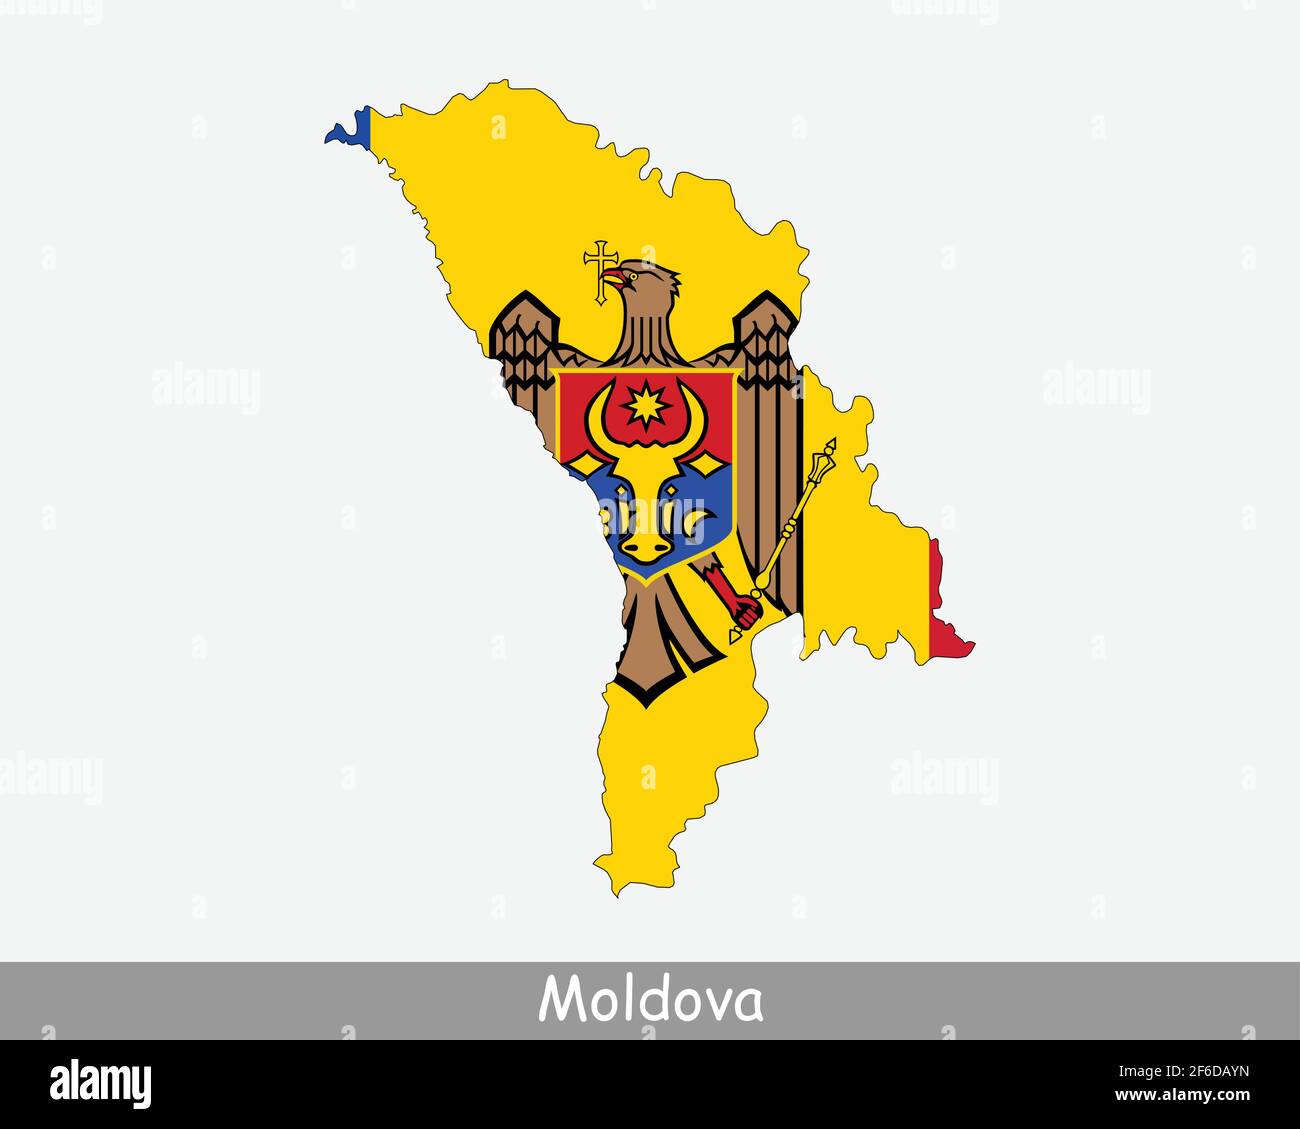 Moldova Map Flag. Map of the Republic of Moldova with the Moldovan national flag isolated on white background. Vector Illustration. Stock Vector